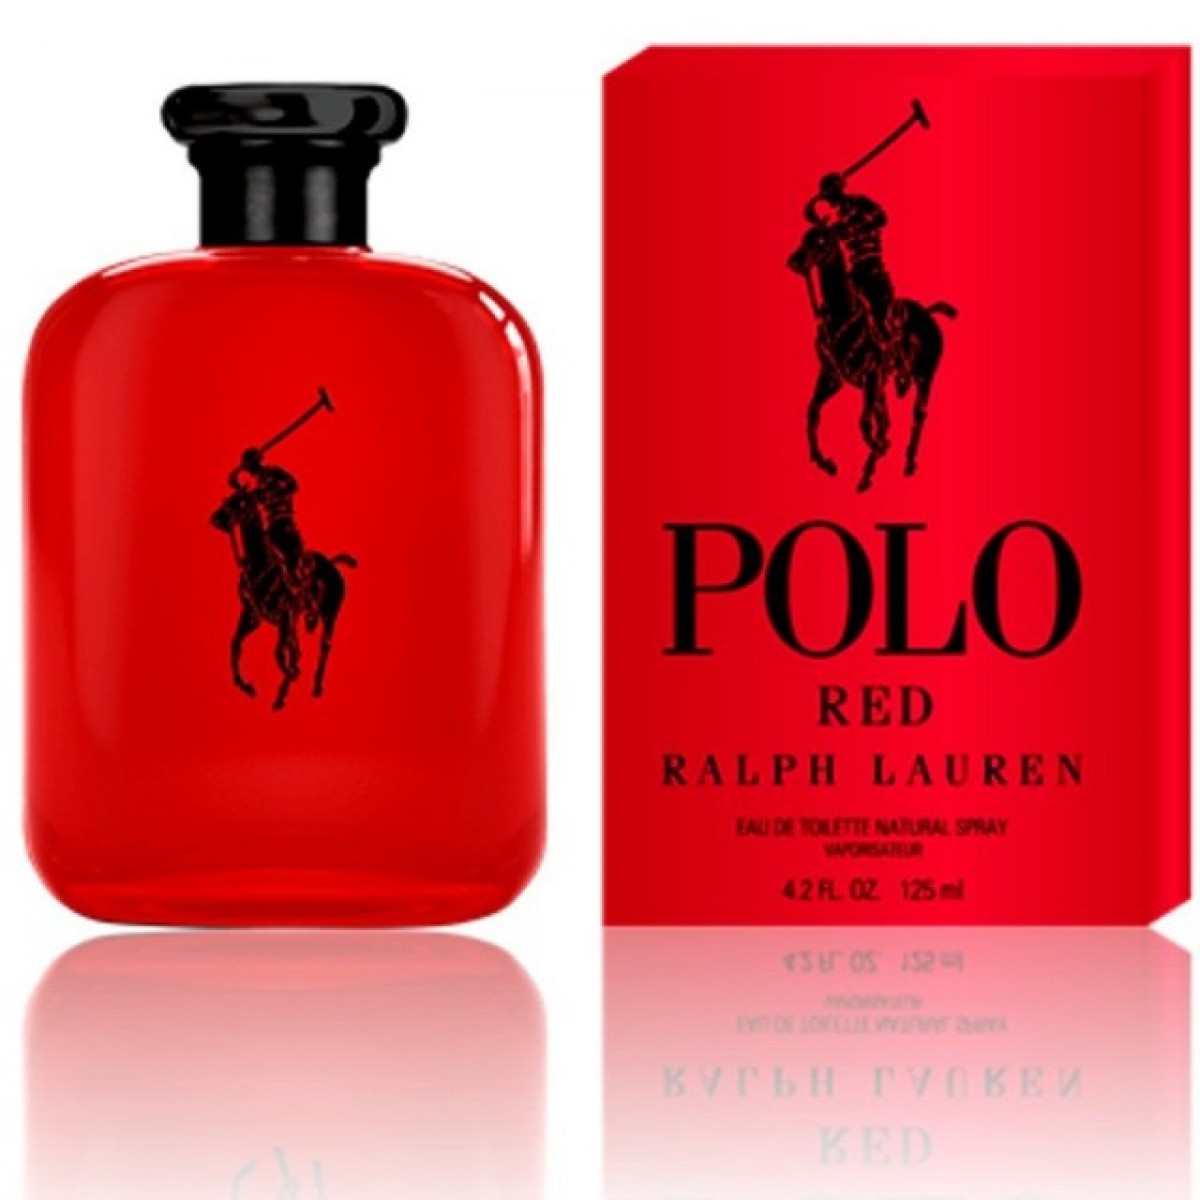 polo-red-by-ralph-lauren